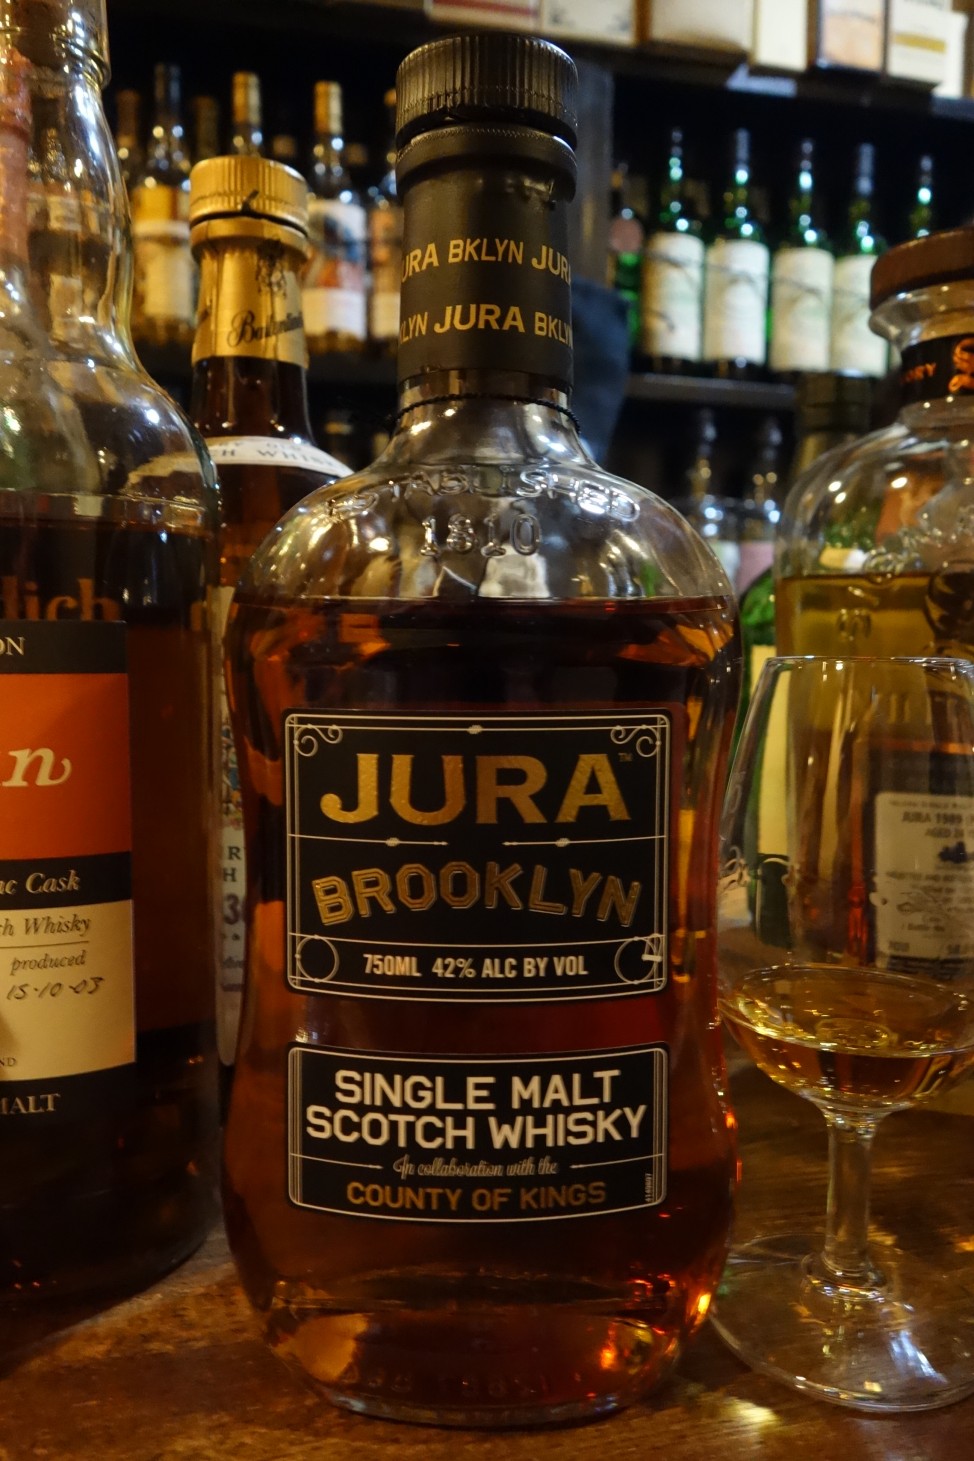 ISLE OF JURA OB "BROOKLYN" In collaboration with the COUNTY OF KINGS